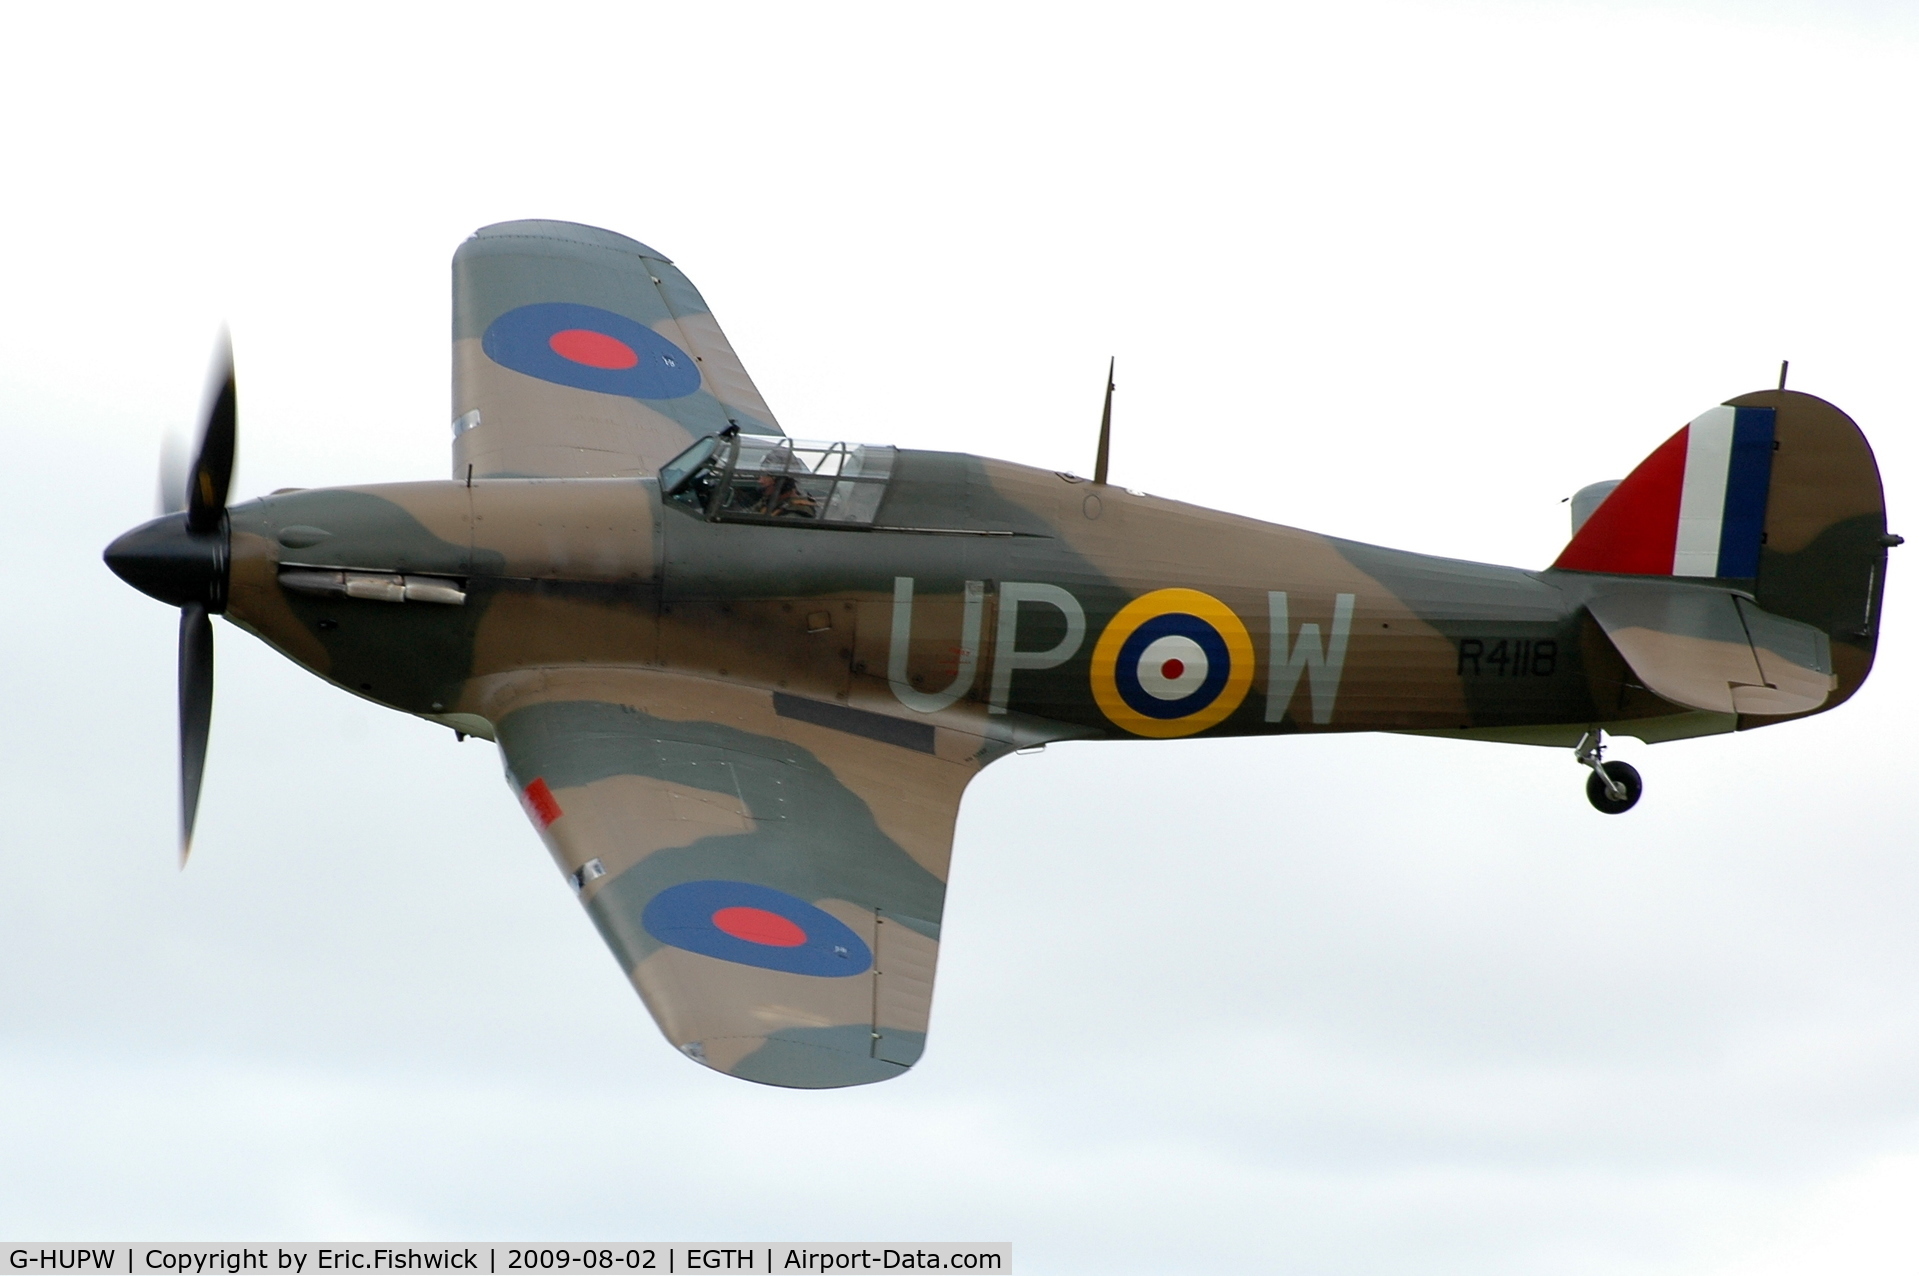 G-HUPW, 1940 Hawker Hurricane I C/N G592301, 41. R4118 at Shuttleworth Military Pagent Air Display  Aug 09.